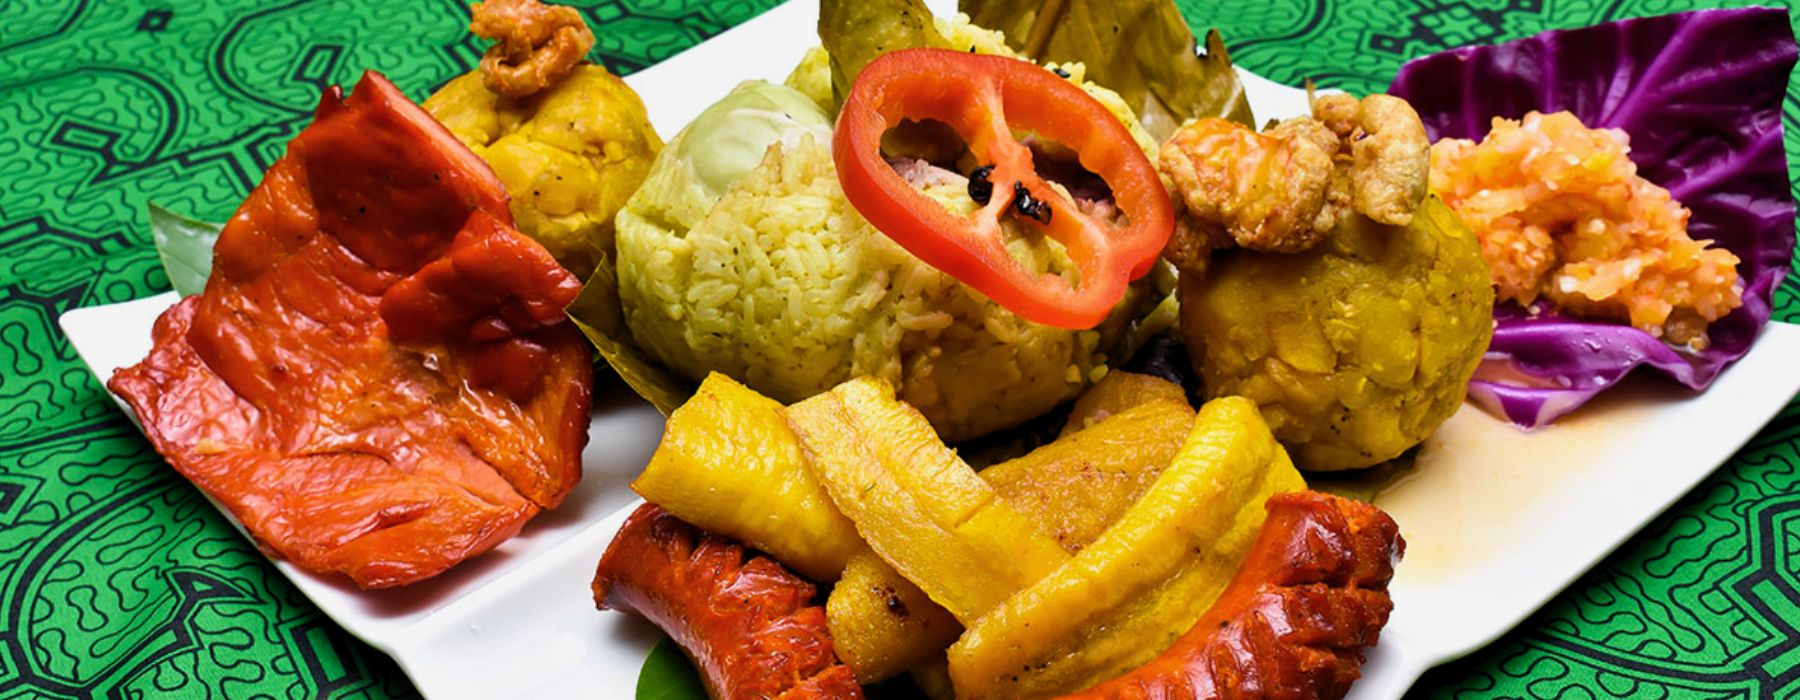 AMAZON RAINFOREST FOOD: 11 TRADITIONAL DISHES YOU HAVE TO EAT